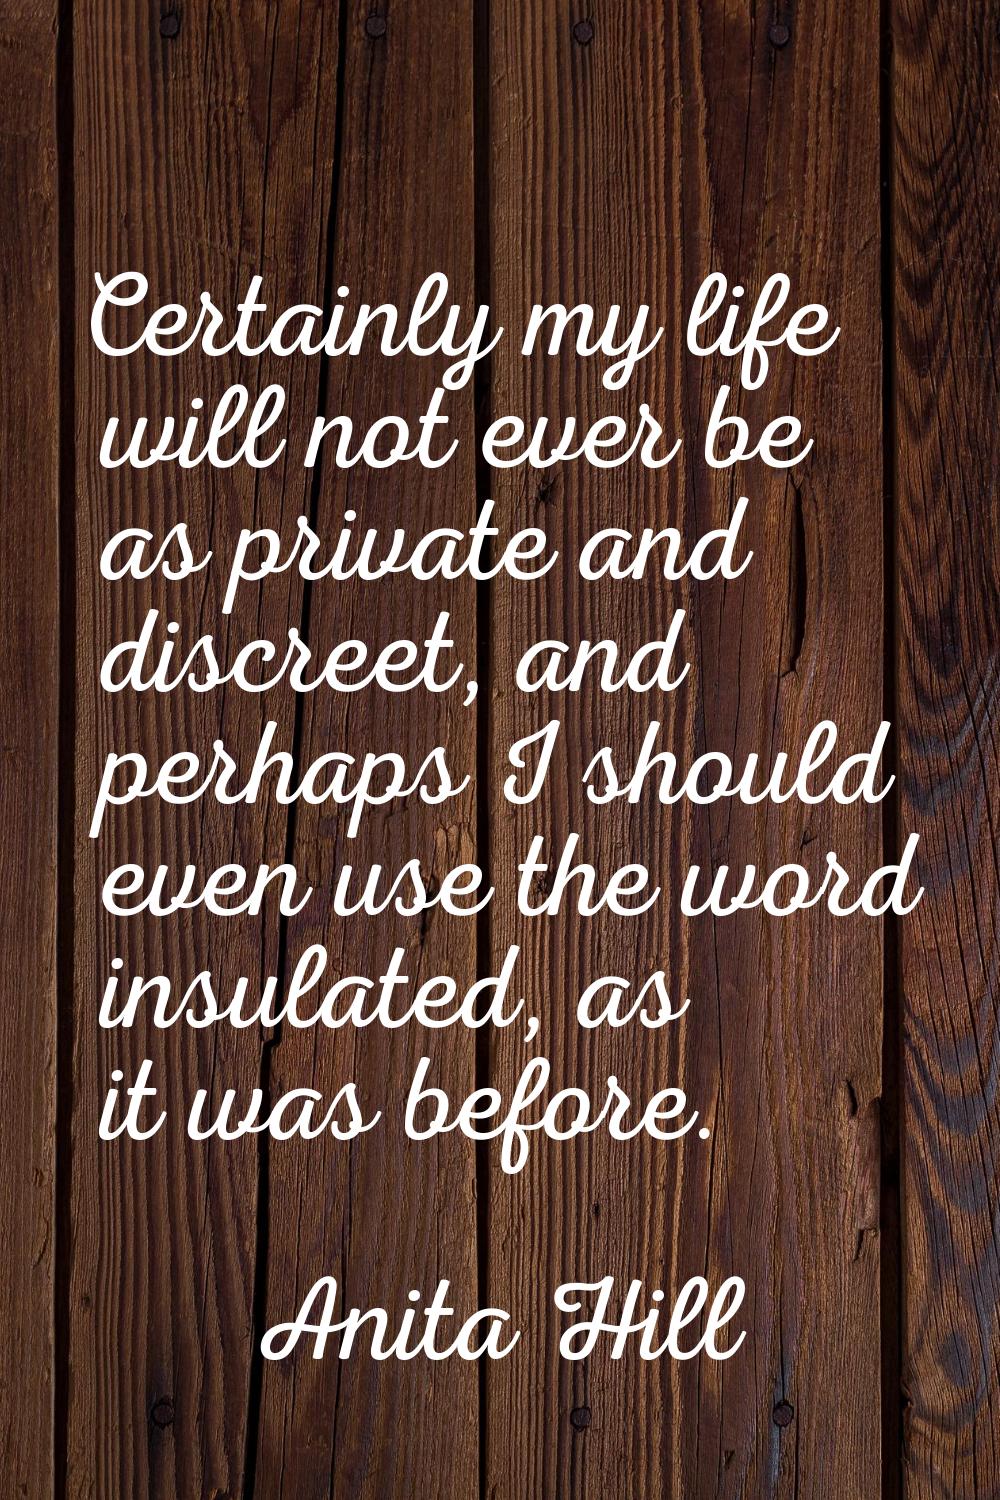 Certainly my life will not ever be as private and discreet, and perhaps I should even use the word 